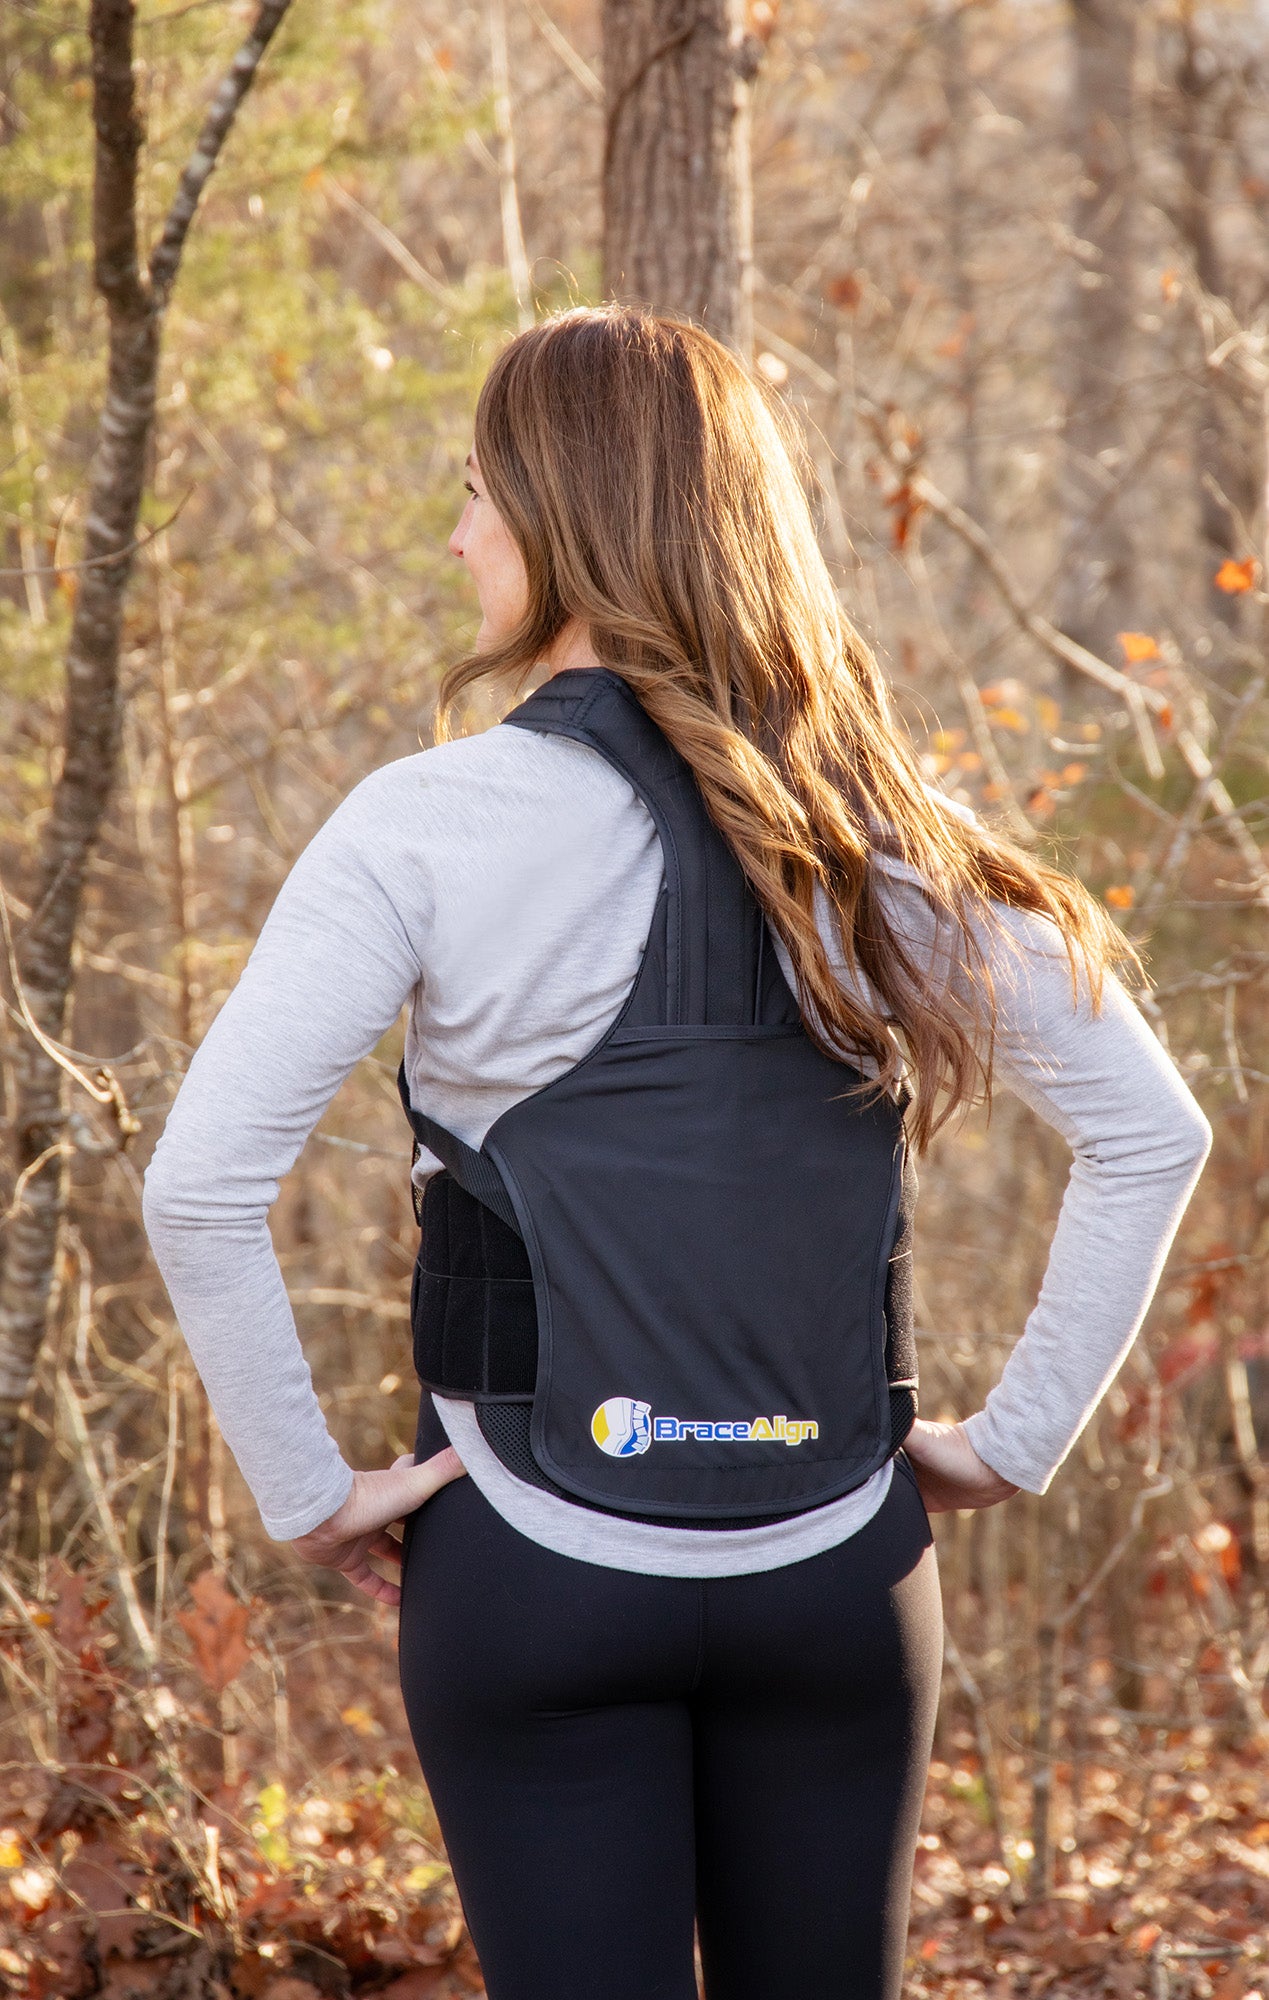 HKJD Full Body TLSO Back Brace - PDAC Approved Pain Relief and Spinal  Alignment Support for Osteoporosis, Compression Fractures, and Post Surgery  with